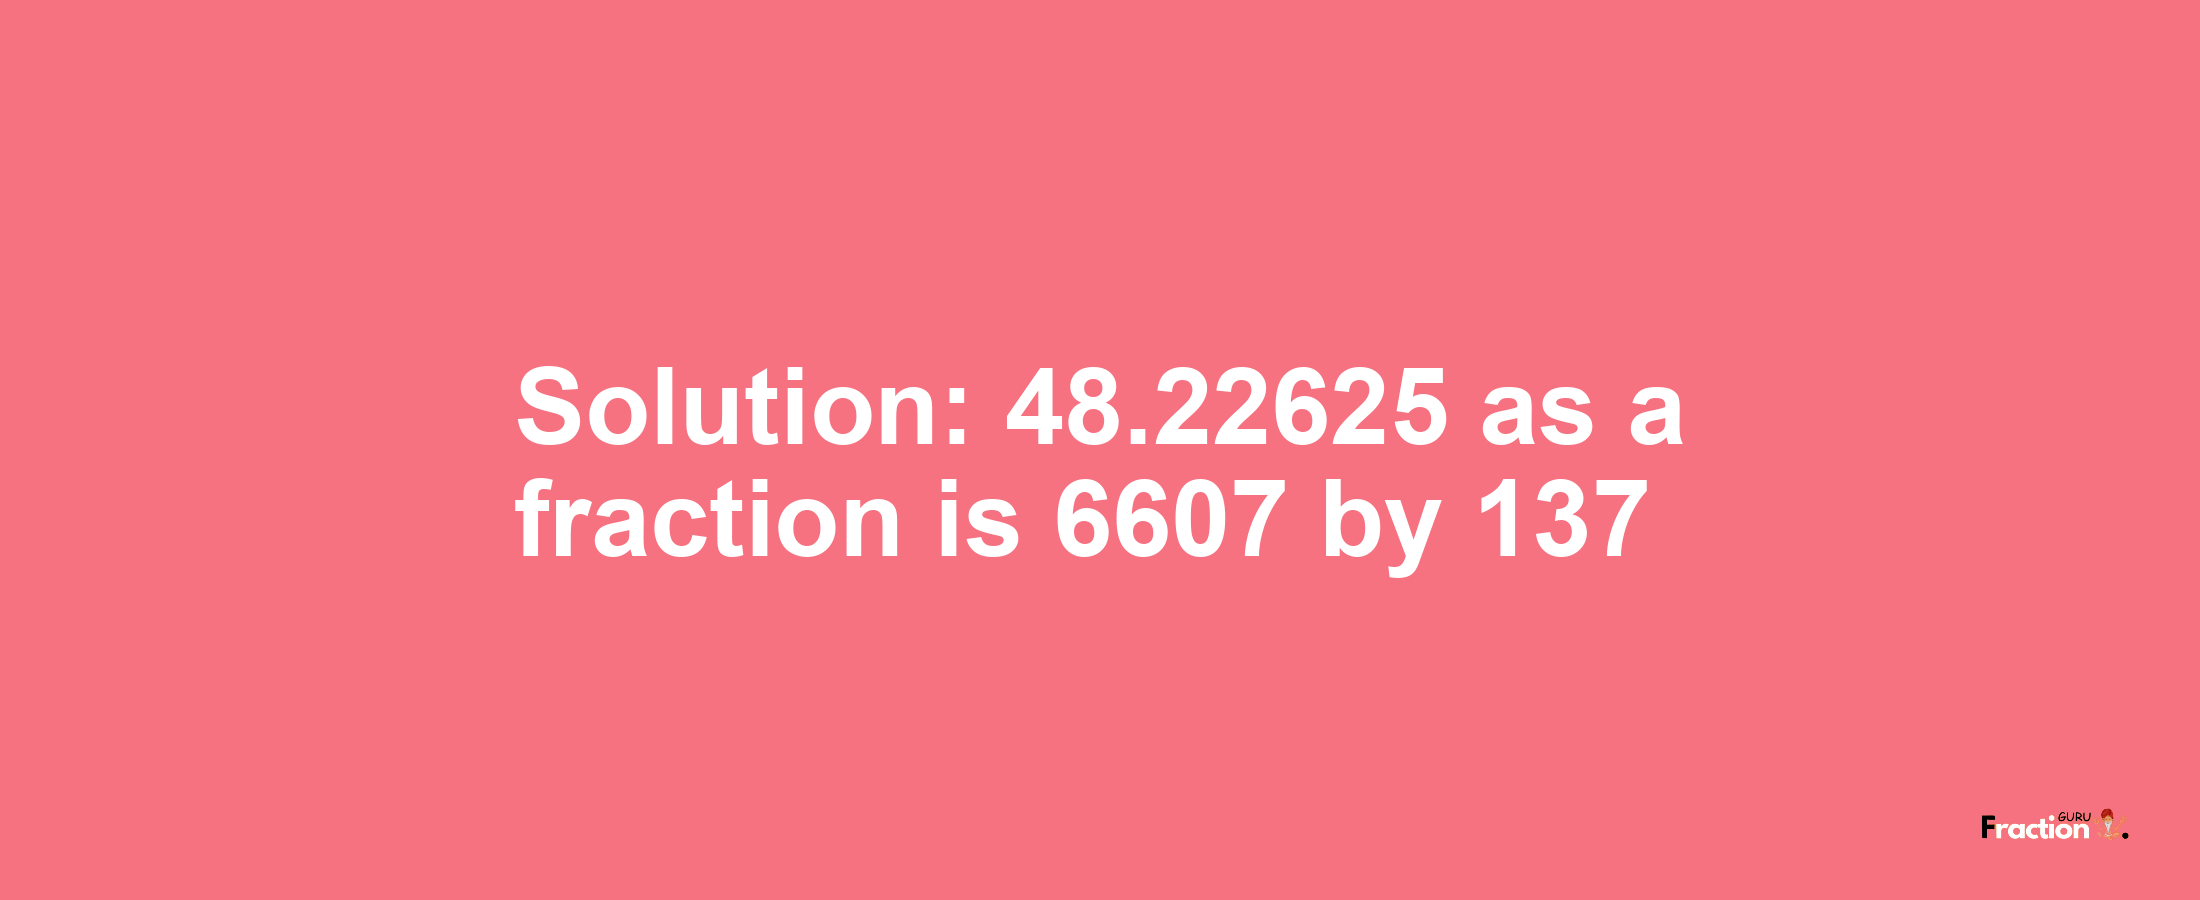 Solution:48.22625 as a fraction is 6607/137